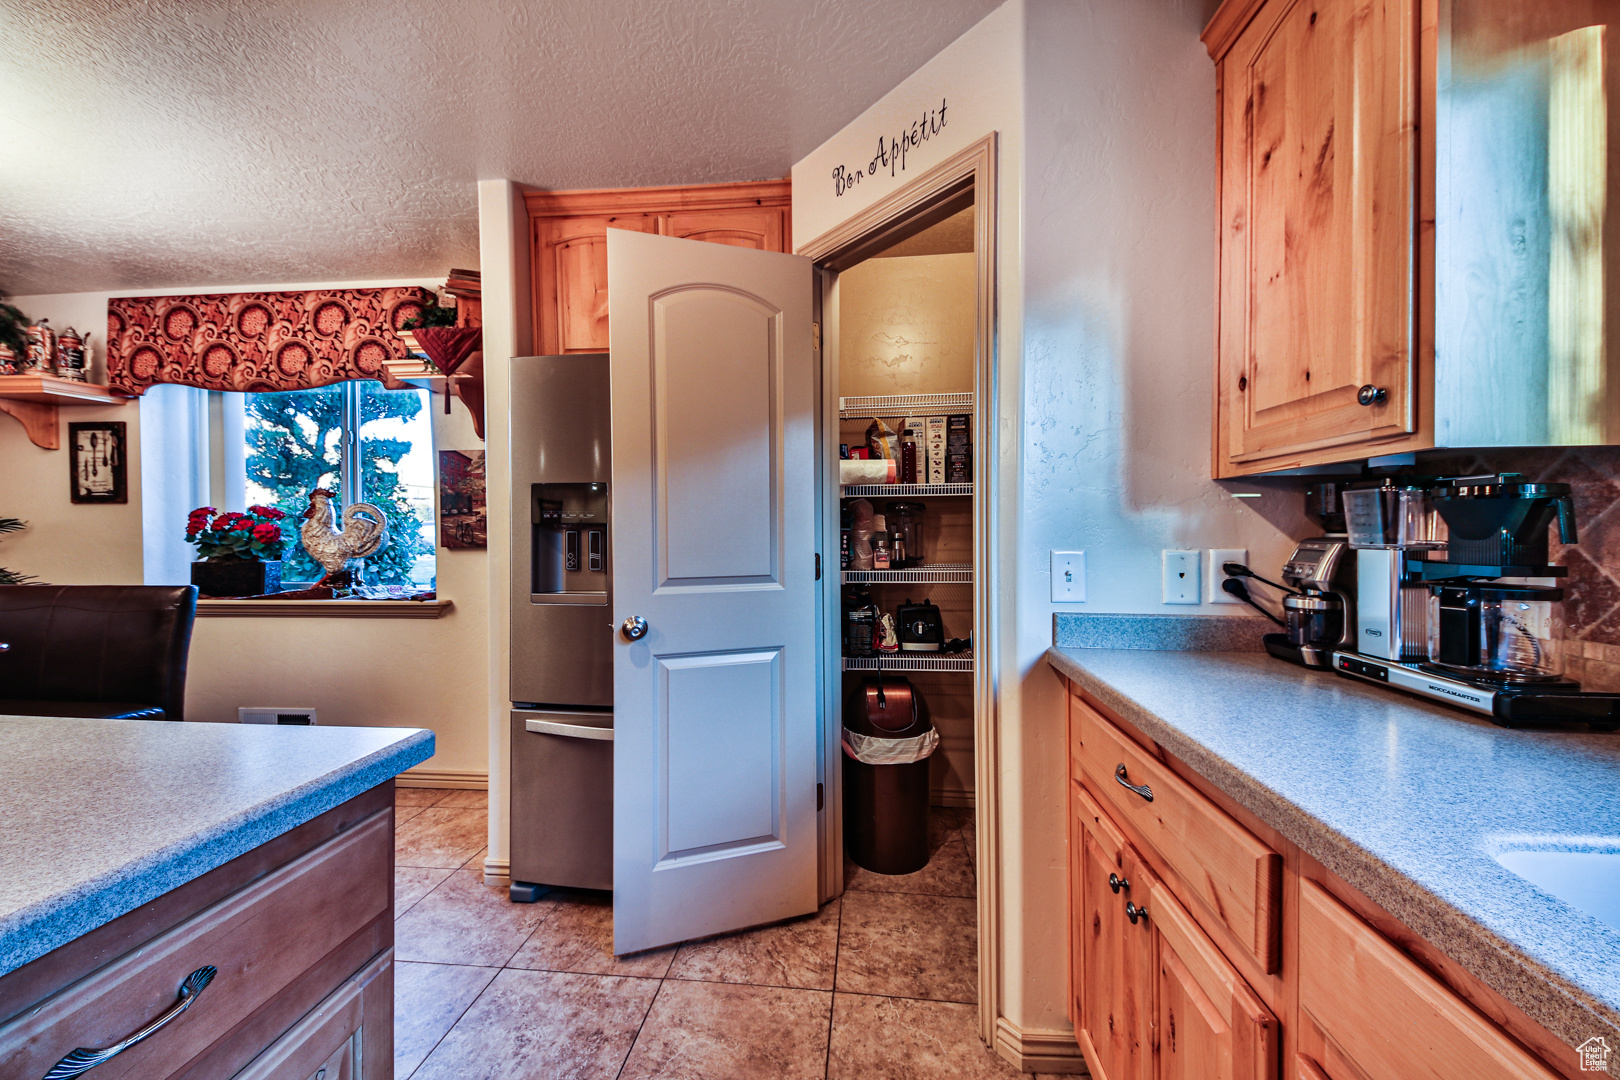 Kitchen with a textured ceiling, light tile floors, and stainless steel refrigerator with ice dispenser